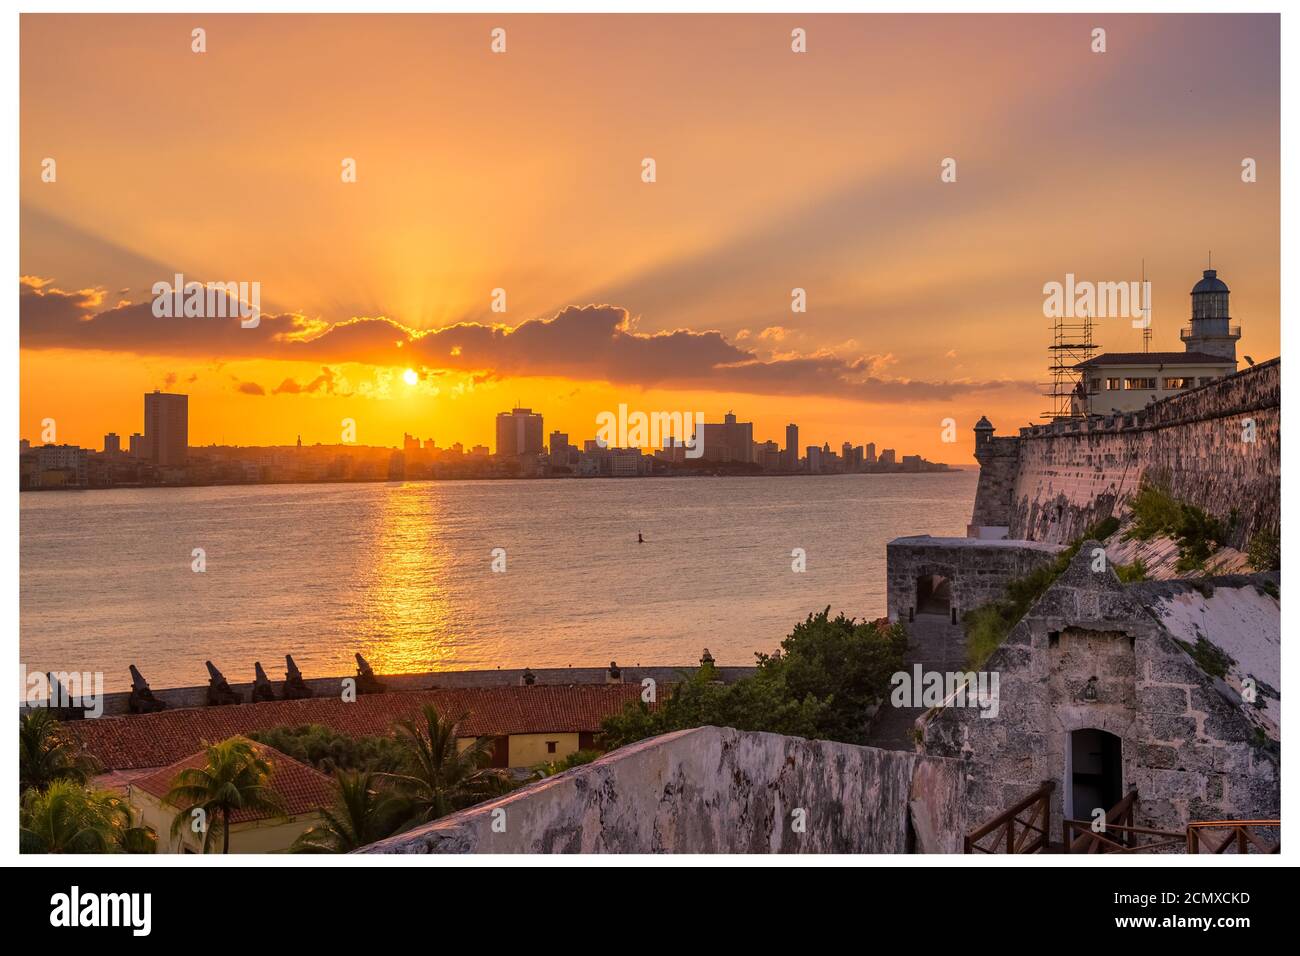 Beautiful sunset in Havana with a view of the city skyline , the El Morro lighthouse and the sun setting over the buildings - Seen from across the bay Stock Photo